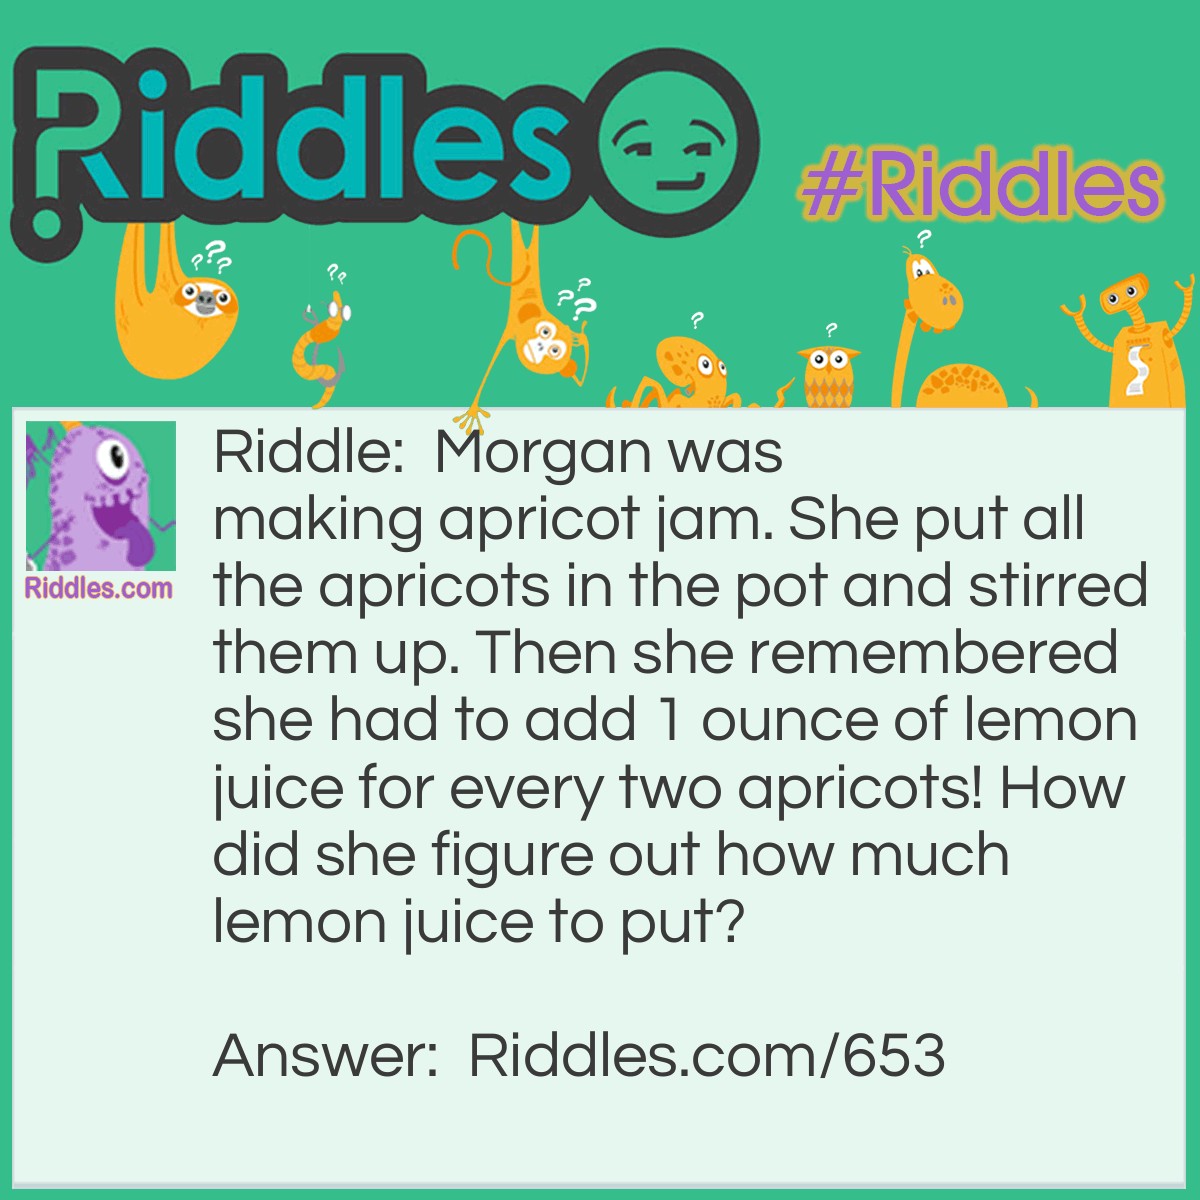 Riddle: Morgan was making apricot jam. She put all the apricots in the pot and stirred them up. Then she remembered she had to add 1 ounce of lemon juice for every two apricots! How did she figure out how much lemon juice to put? Answer: She counted the pits!